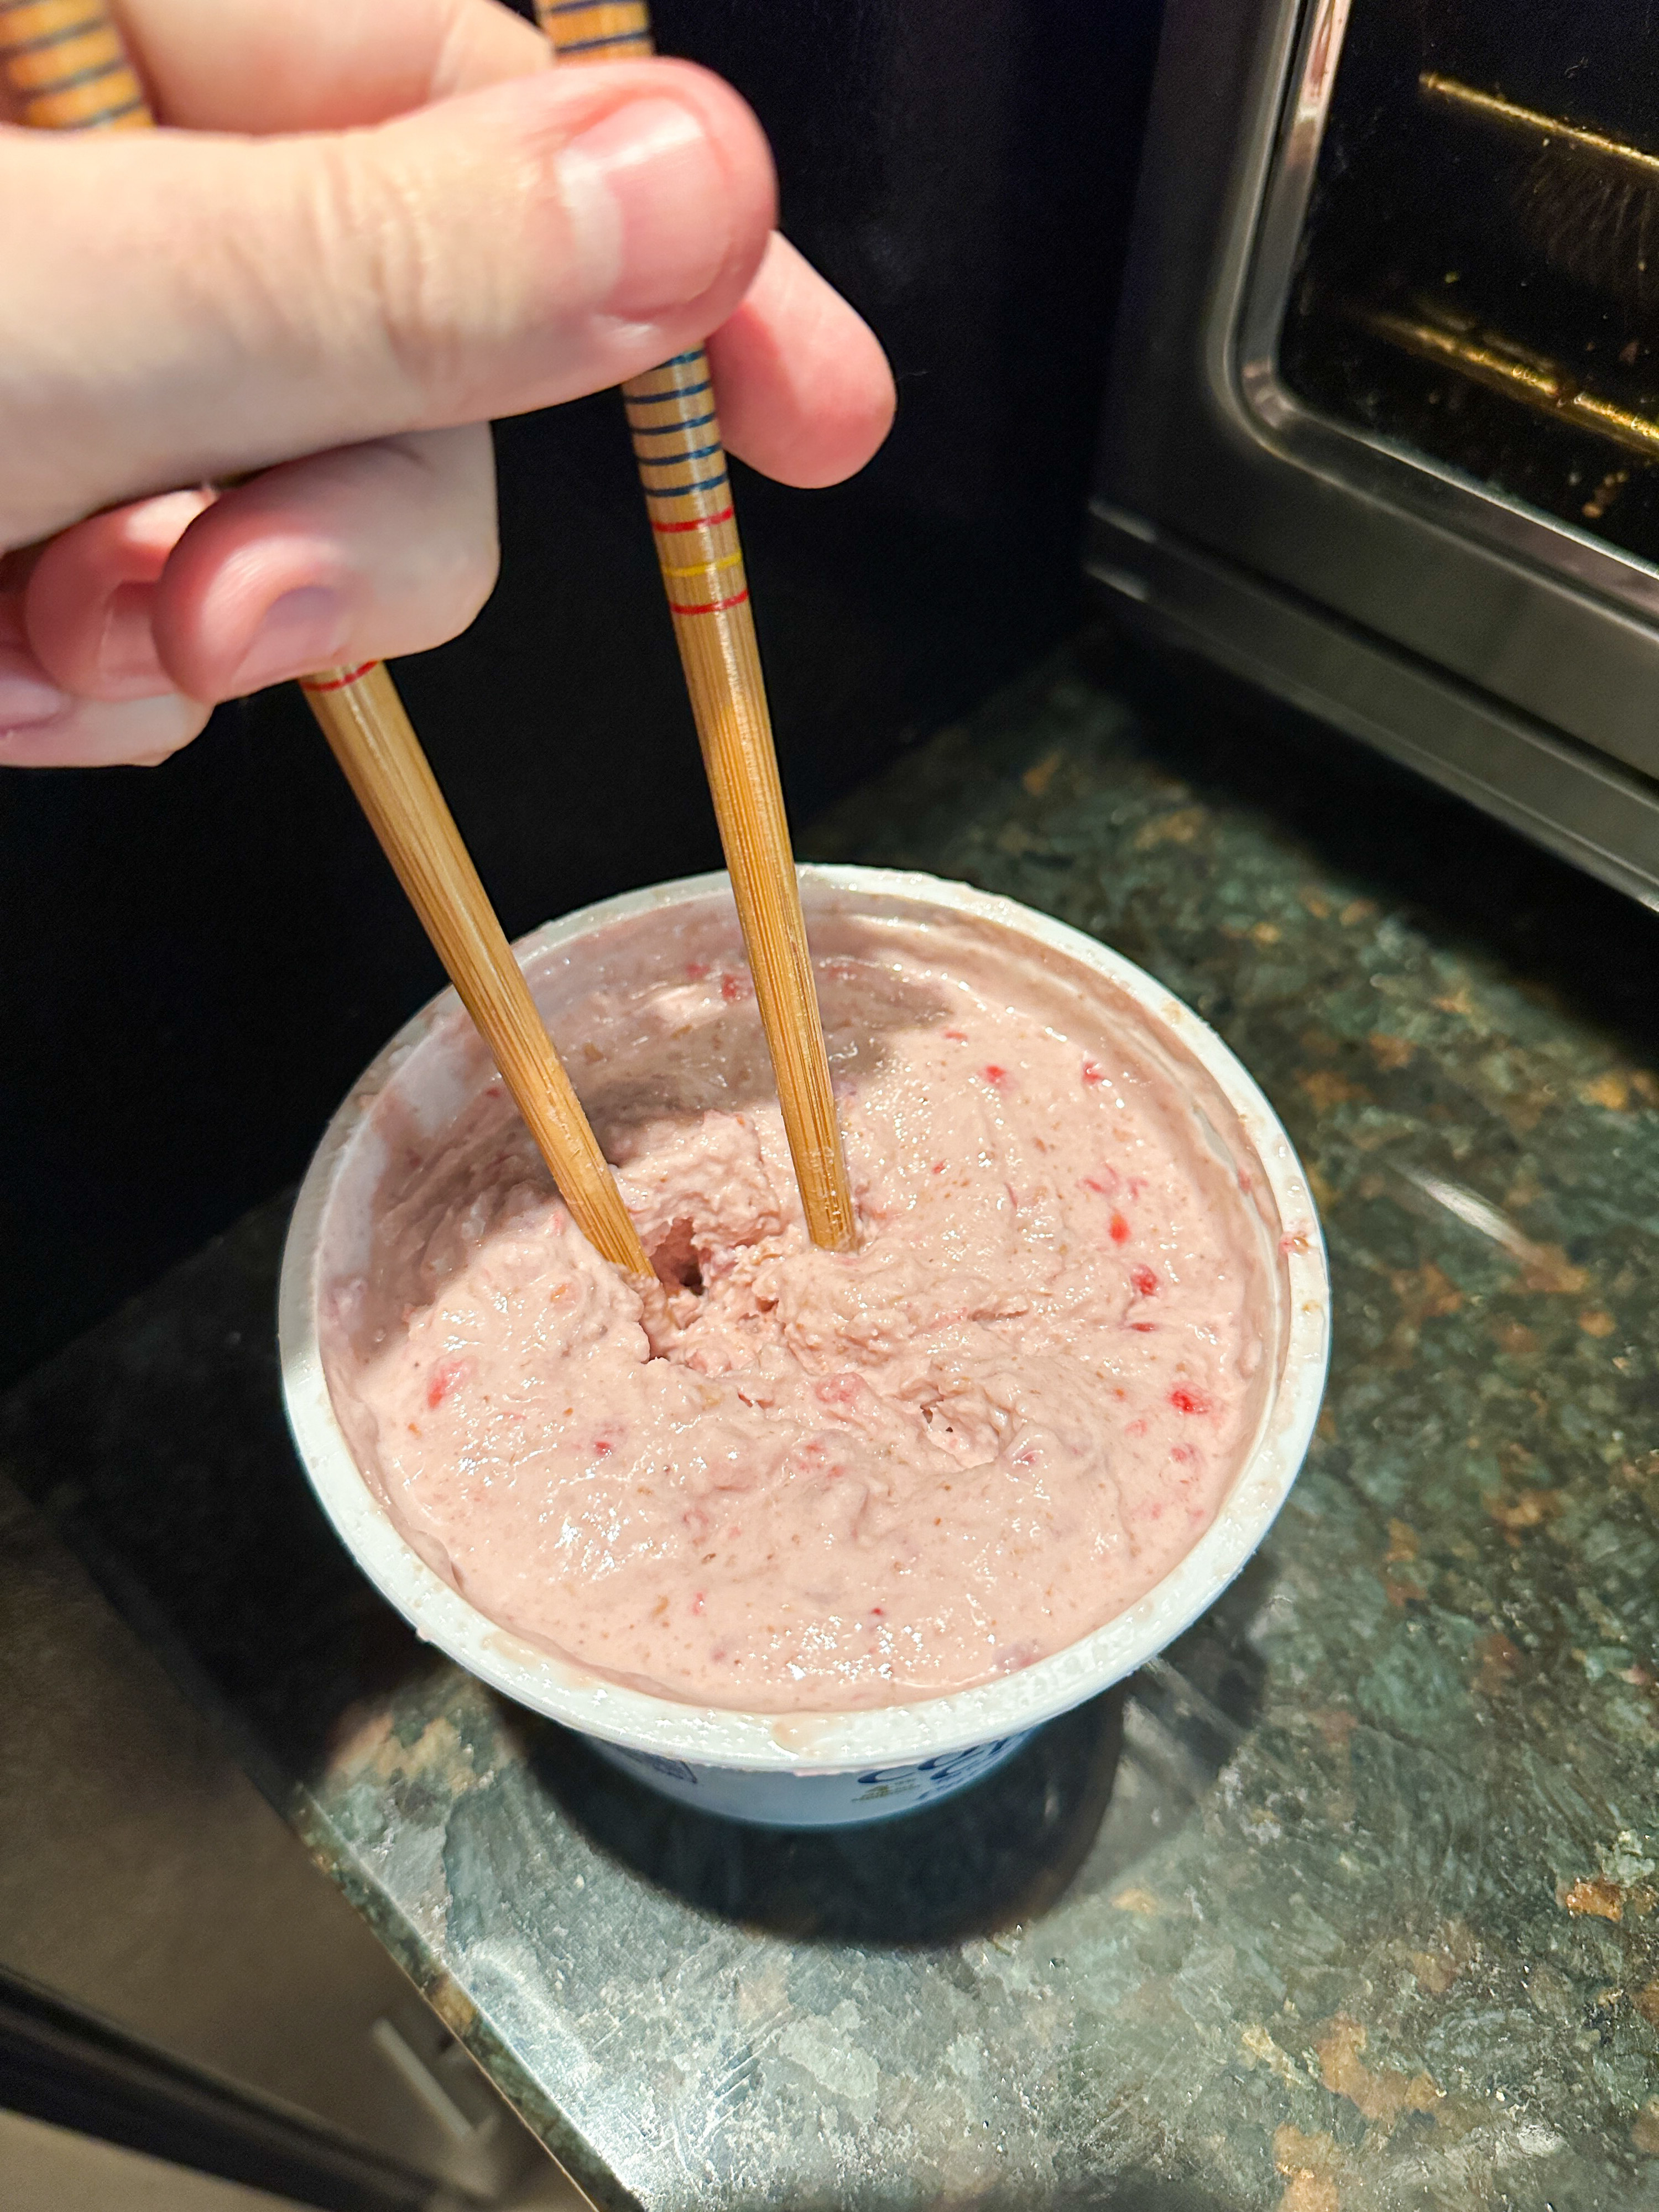 whisking around the ice cream in the container with two chop sticks